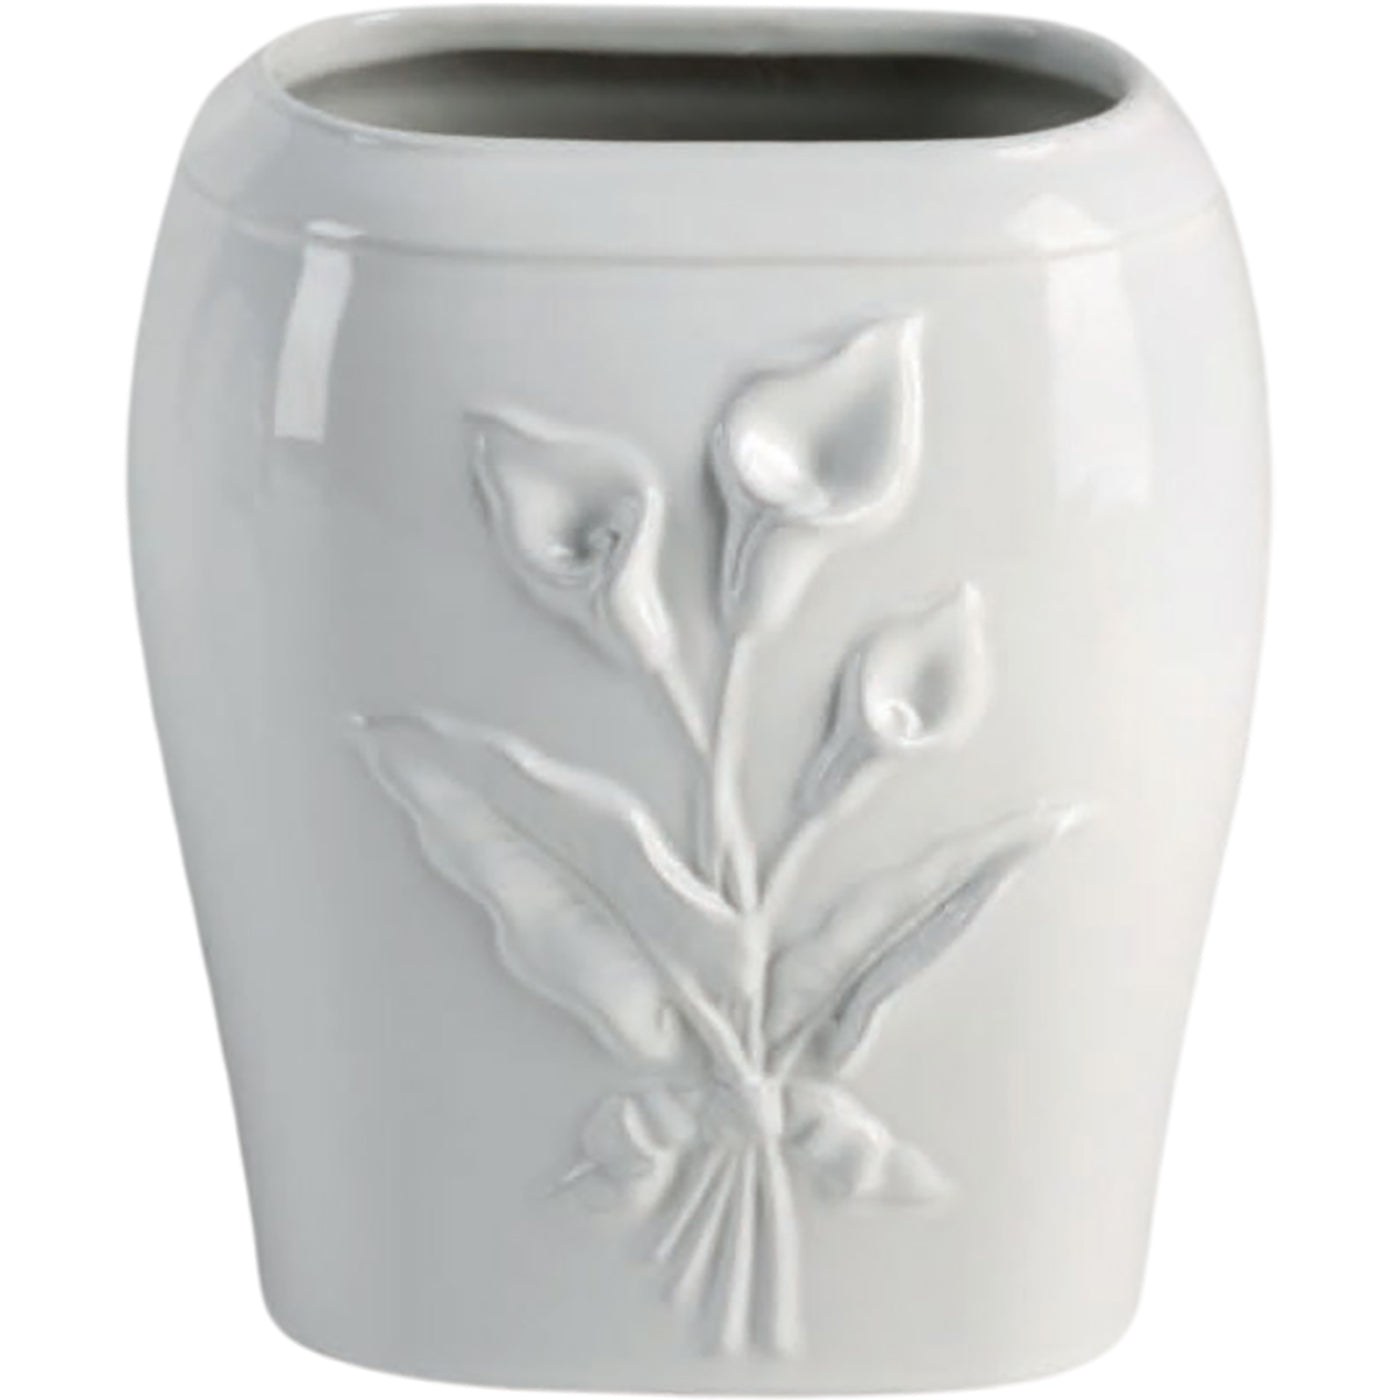 Rectangular grave vase Calla 19x17cm - 7.5x6.7in In white porcelain, wall attached CAL160P